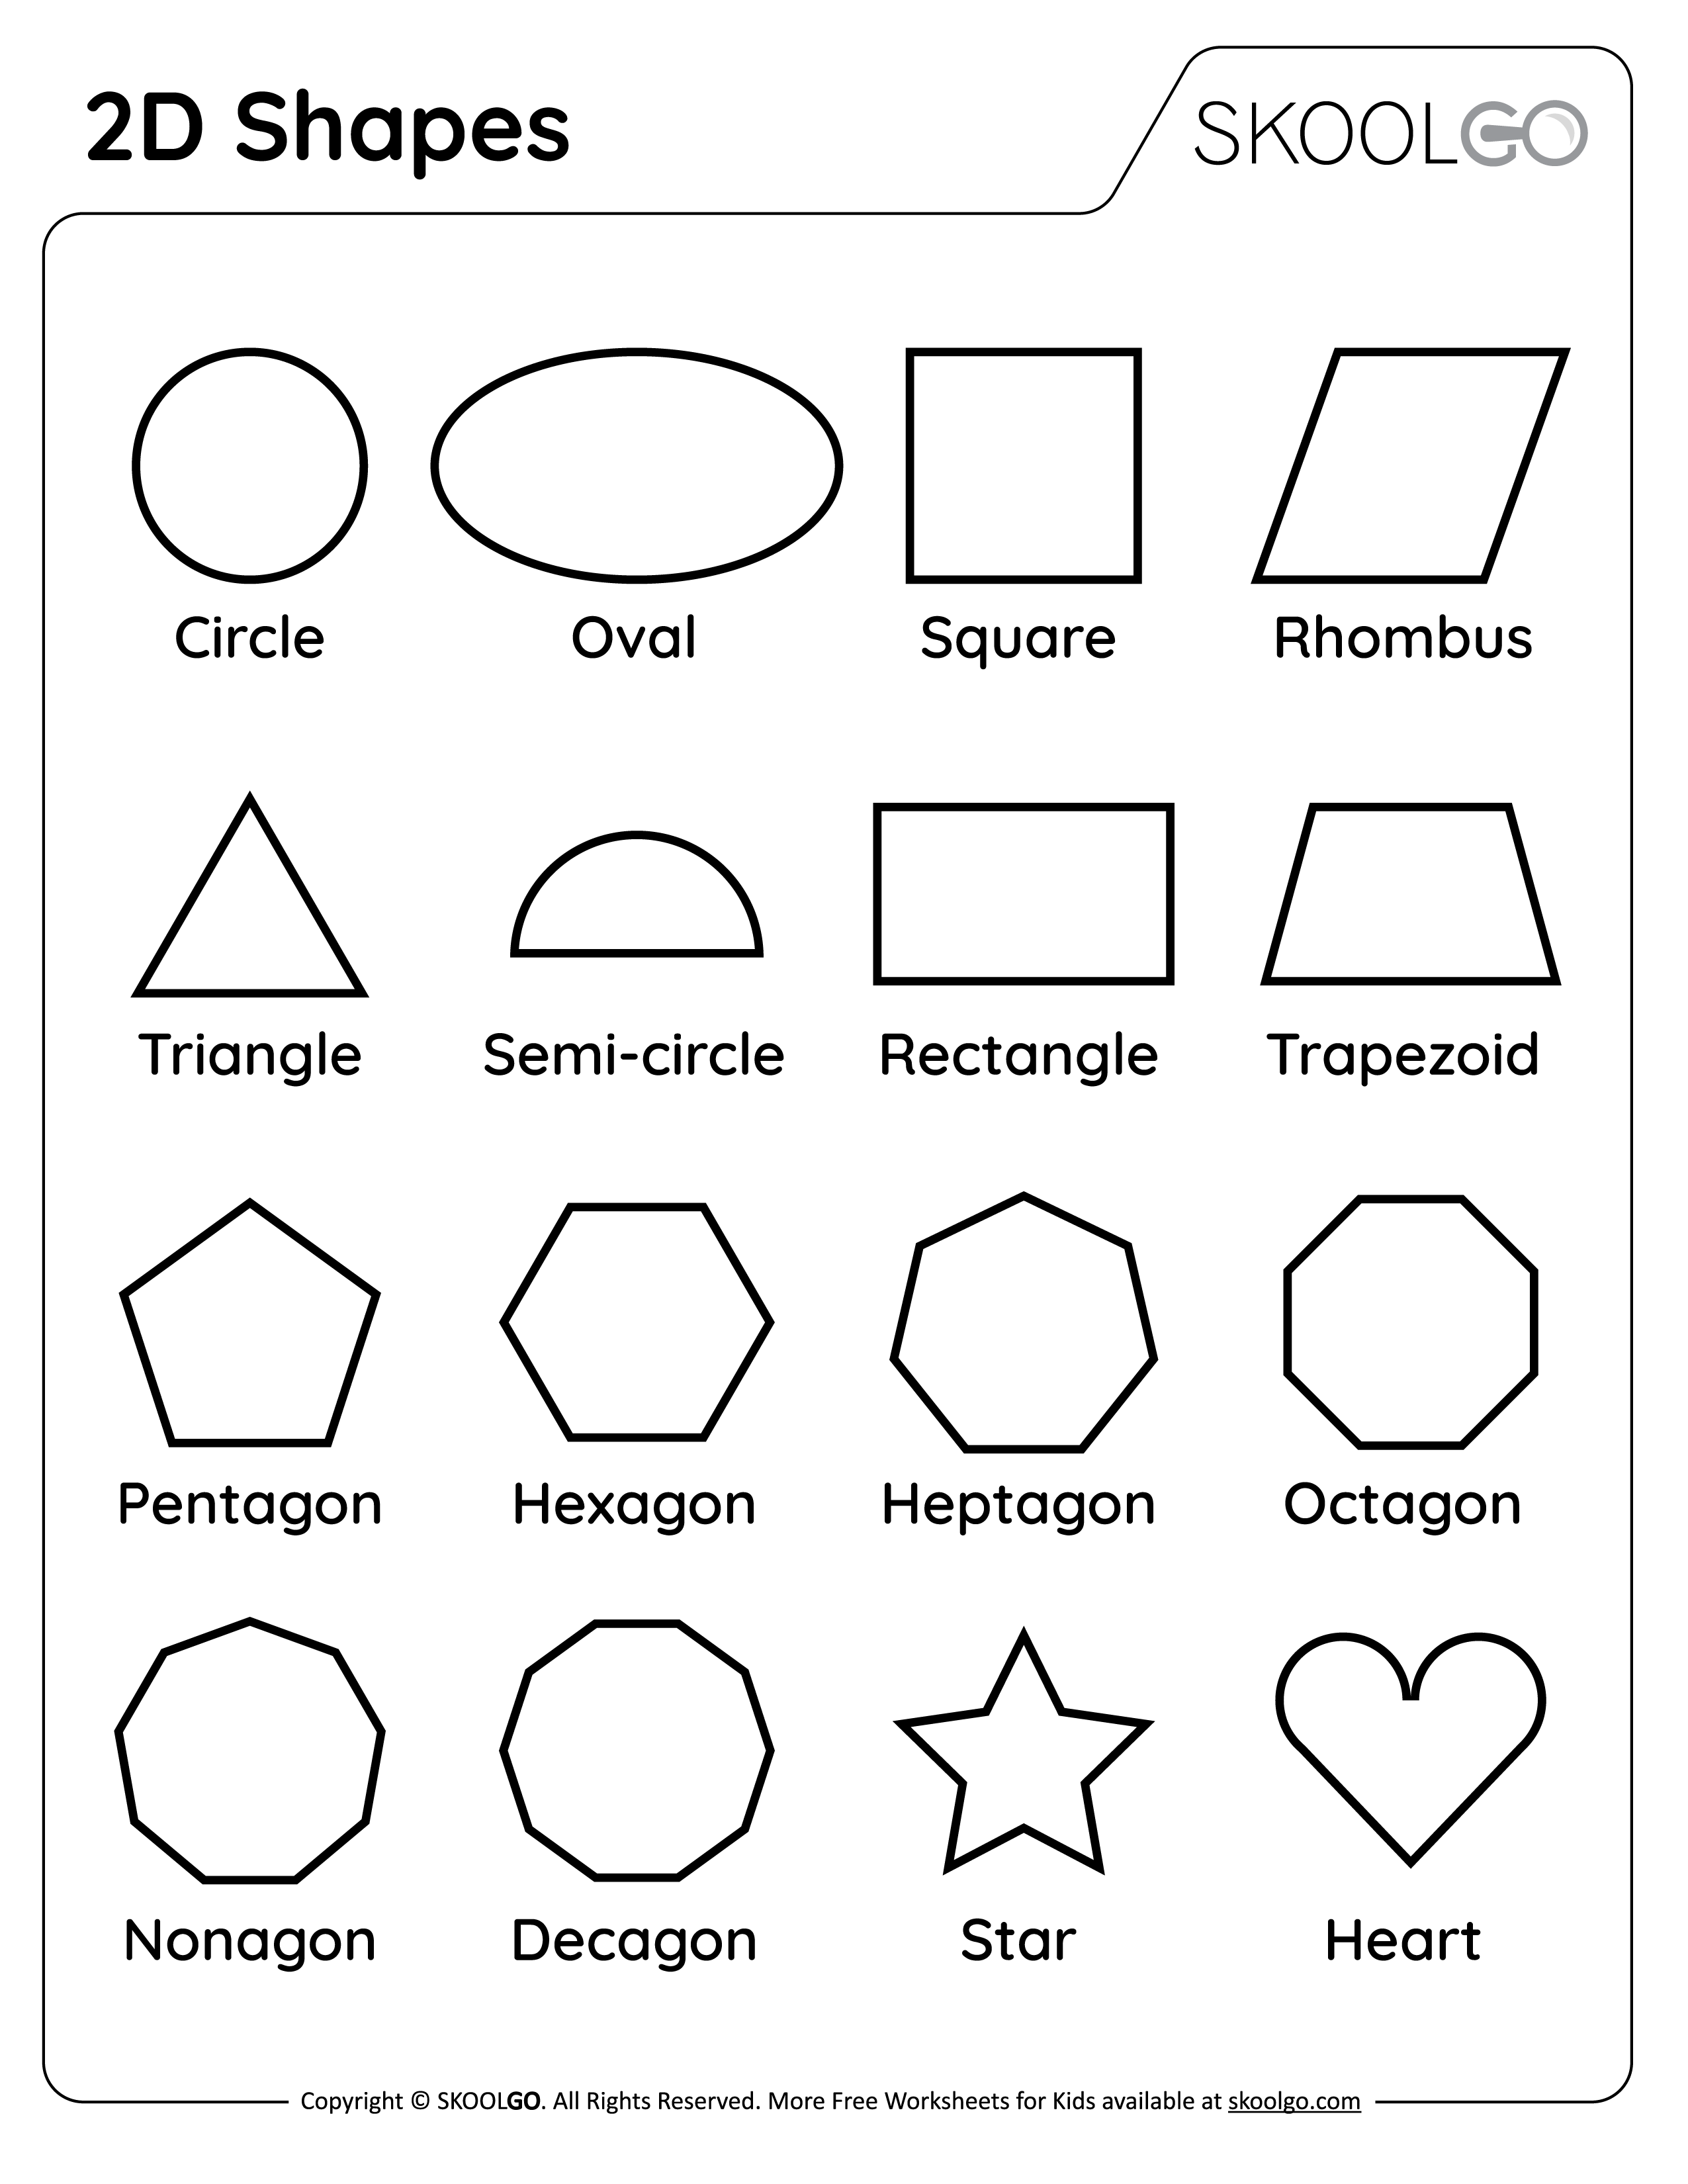 2D Shapes - Free Black and White Worksheet for Kids